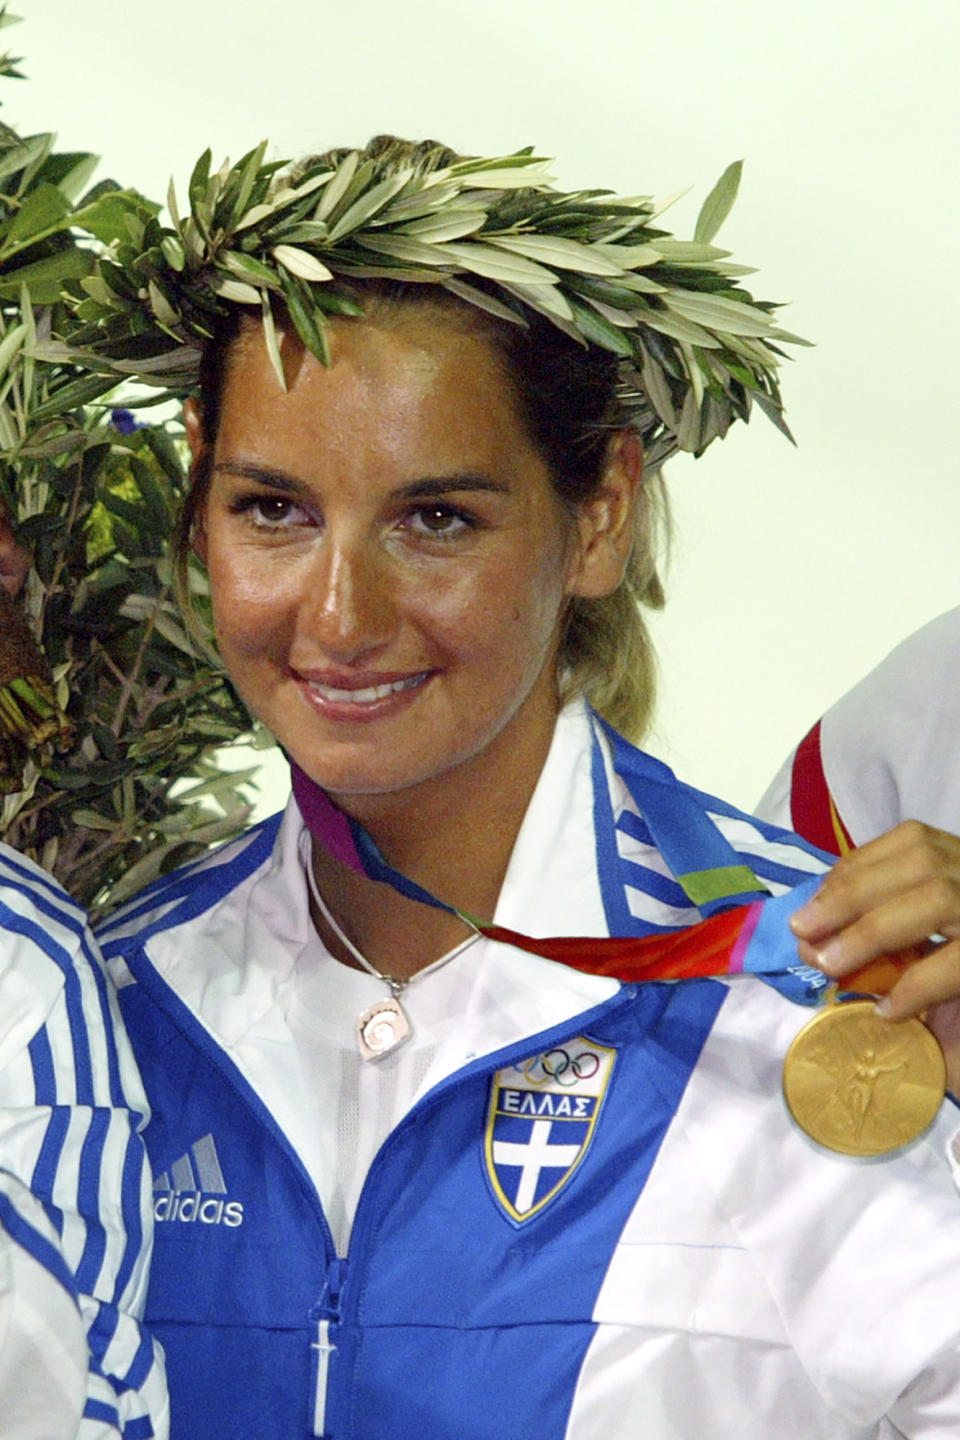 FILE - In this Saturday, Aug. 21, 2004 file photo, Greek 470 class skipper Sofia Bekatorou, displays her gold medal during the medal ceremony of the women's double-handed 470 dinghy sailing event at the 2004 Olympic Games in Athens, Greece. Olympic sailing champion Sofia Bekatorou of Greece has accused an unnamed sporting official of sexually assaulting her in 1998 during preparations for the Sydney Games. Bekatorou made the allegation Thursday Jan. 14, 2021 while speaking at an online event organized by the ministry of culture and sport. (AP Photo/Herbert Knosowski, file)